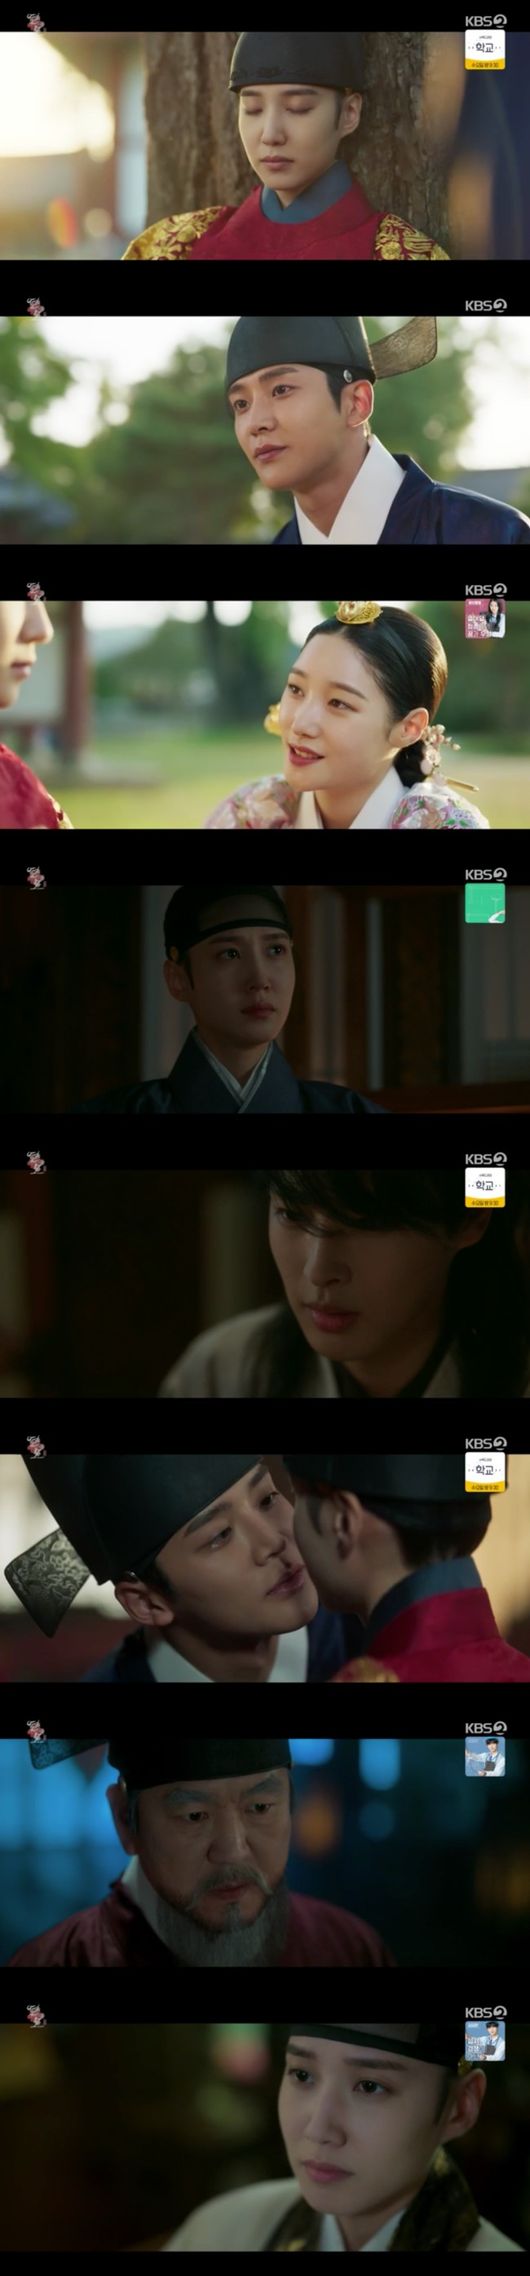 Park Eun-bin and RO WOON of The Kings Action expressed their hearts to each other with active affection.In the 15th episode of KBS 2TVs monthly drama The Kings Action (playplayed by Han Hee-jung and directed by Song Hyun-wook Lee Hyun-seok), which was broadcast on the afternoon of the 29th, the contents of Lee Hui (Park Eun-bin) and Jung Ji-woon (RO WOON)s deepening were drawn.They went closer to each other, spending all their time together.Lee re-entered Shin Young-soo (Park Won-sang) and started a counterattack against Han Ki-jae (Yoon Je-moon).Lee Hwi was placed in the kings seat as Han Gi-jae wanted to protect his precious person. Han Ji-jae told Lee to do nothing and stay like a doll, but Lee Hwi did not stay still.After re-employing Shin Young-soo, Yi Hui pressed Han Ki-jae. He uncovered and punished the corruption committed by his man.Han Ki-jae went to Yi Hui and warned, Dont dare challenge me, and let me see this.Ga-on Kim (Choi Byung-chan) was investigating a conspiracy entangled in the death of Hyejong (Lee Pil-mo).He chased the inner tube that had been running away in a hurry shortly after Hyejong died, and found that he had nailed it as if he were trying to self-determination, and then he went on a chase after knowing that there was someone who had fled the scene.As Jung Ji-woon stayed with Lee, he became closer to each other. He told Jung Ji-woon to stay with him more, and Jung Ji-woon was also pleased.Jung Ji-woon, who was in the Seungjeongwon and watched all the situations of Yi-hui and came together, expressed his affection boldly.The relationship between Jung Ji-un and Lee Hyun (Nam Yoon-su Boone) became awkward, as both had Yi Hui in mind.Jung Woon and Lee Hyun were called side by side by side by side by the middle-class Noh Ha Kyung (Chung Chae-yeon), and Roh Ha Kyung asked them what they liked.The heavy war heard the story of two people and found Yi Hui with flowers and fruits pleasantly. He was sorry to see the heavy war that took care of him.Ga-on Kim returned to Kyung with Yoon Hyung-seol (played by Kim Jae-chul), the head of the internment team; Ga-on Kim confessed his identity to Lee Hui.Yoon Hyung-seol said he was chasing the truth of Hyejongs poisoning with Ga-on Kim.The heart of the middle-class Noha Kyung toward Lee was deepened, and Jung Woon also could not hide his heart about Lee.Jeong Seok-jo (Bae Soo-bin), who realized the identity of Lee-hui, knew the relationship between Jung-woon and Lee-hui, and had to deepen his worries.Jung Woon looked at Lee Hwi, who was sleeping on a tree, with a loving eye, and quickly avoided his position due to the sound of Noh Ha Kyung approaching.Noha was staring at the sleeping Yi Hui, then sneaking closer to kiss him, and he fell in surprise at the moment when he opened his eyes and fell.Jung Woon, who was waiting for Lee in the battle, revealed jealousy, and Lee Hui comforted such a jungwoon.Yi Hui made an appointment to meet with Jung Ji-woon separately, and two people who met in their own place, Lee Hui, approached him and kissed him, soothing Jung Ji-woon, who was jealous.Jung Ji-woon looked affectionately at Yi Hui, who conveyed his heart, and he also conveyed his love.KBS 2TV Broadcast Screen Capture